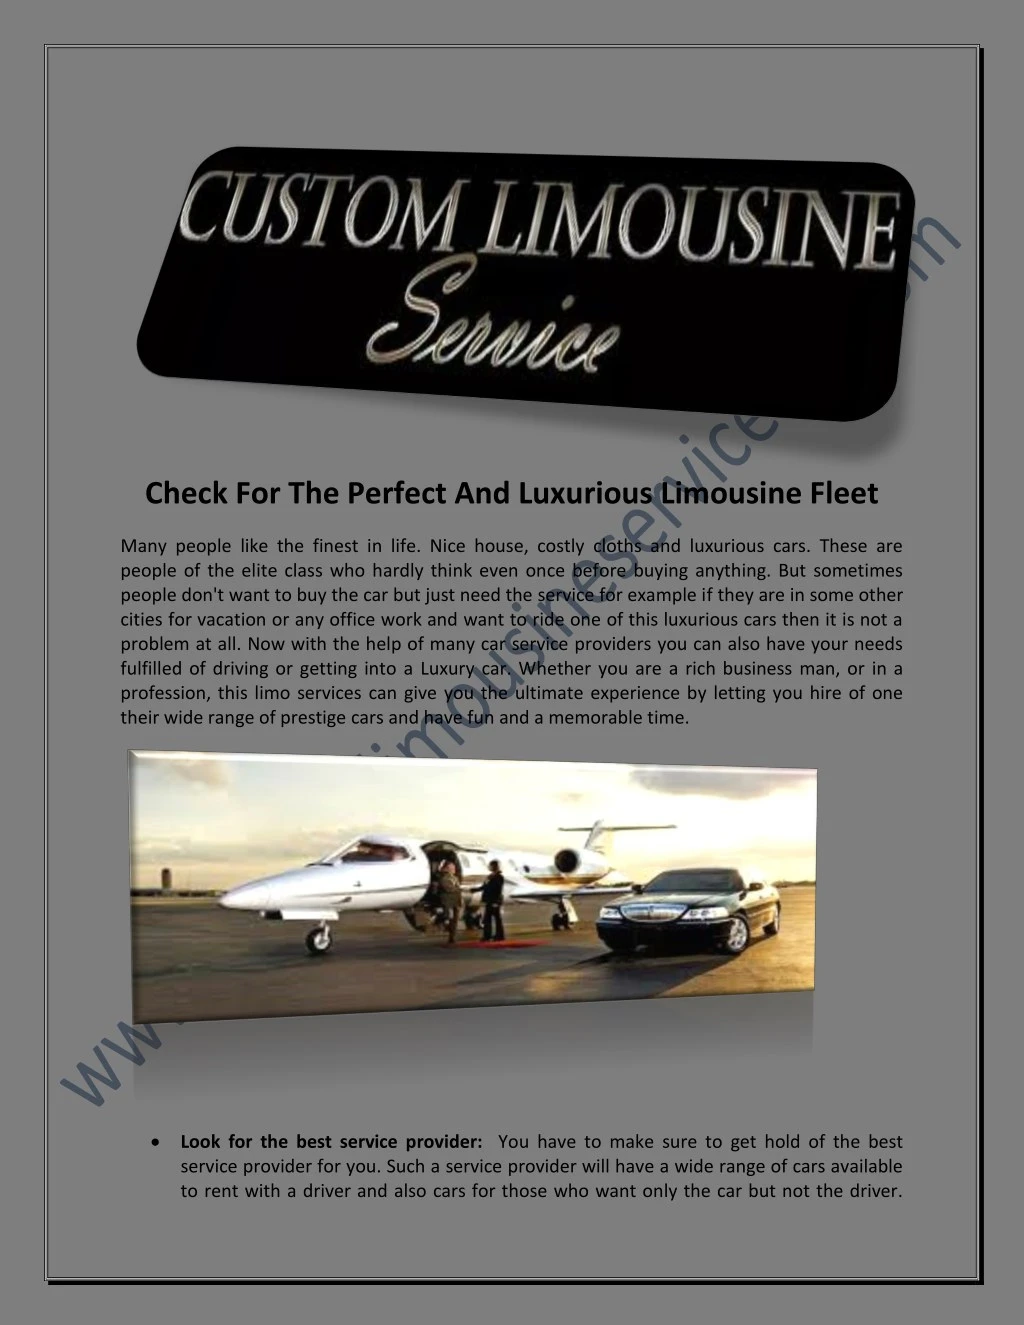 check for the perfect and luxurious limousine